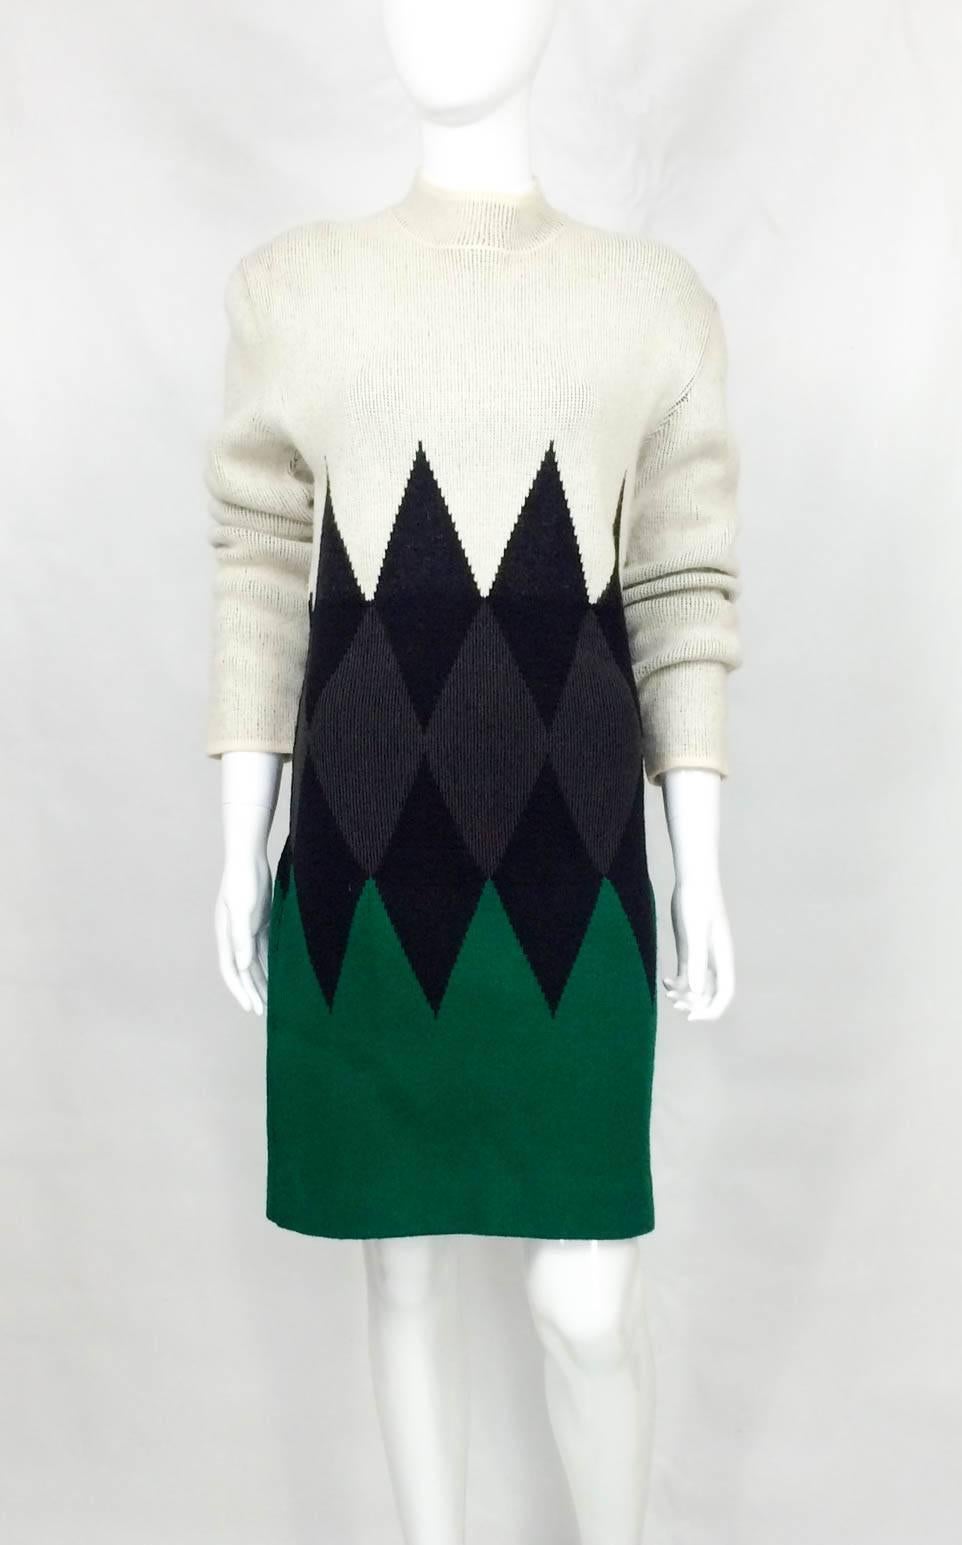 Sleek Vintage Jean Paul Gaultier Wool Dress. This is a stylish long-sleeve dress in beige, black, grey and green with a mock turtle neck. The area with the grey lozenges is slightly cinched in, giving it a little bit of structure and creating a